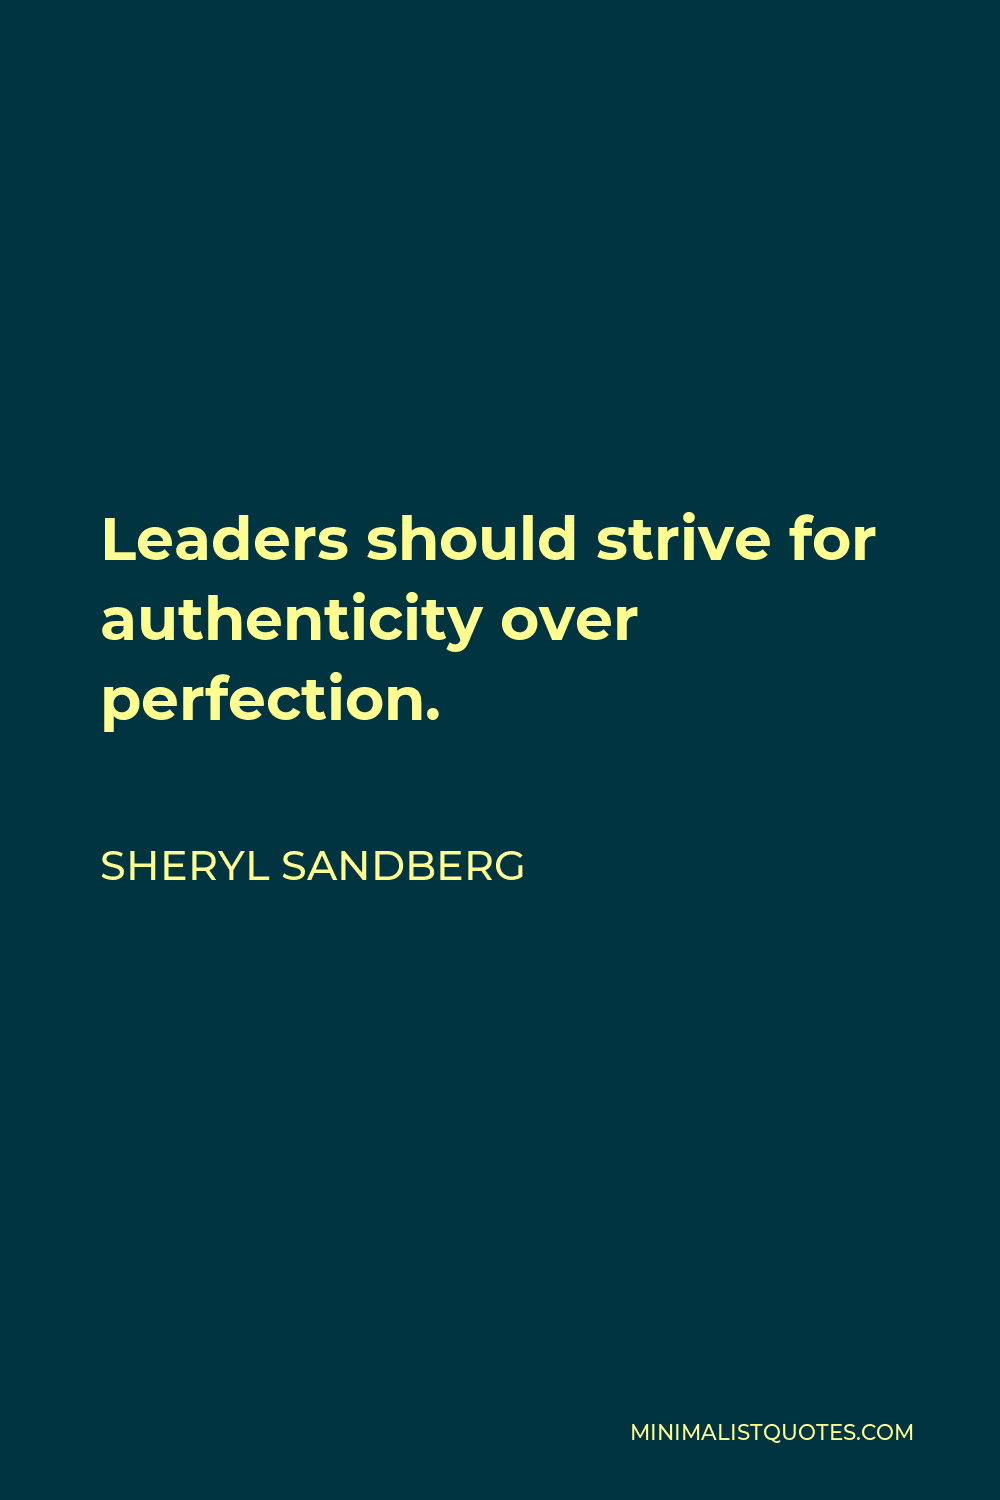 Sheryl Sandberg Quote - Leaders should strive for authenticity over perfection.